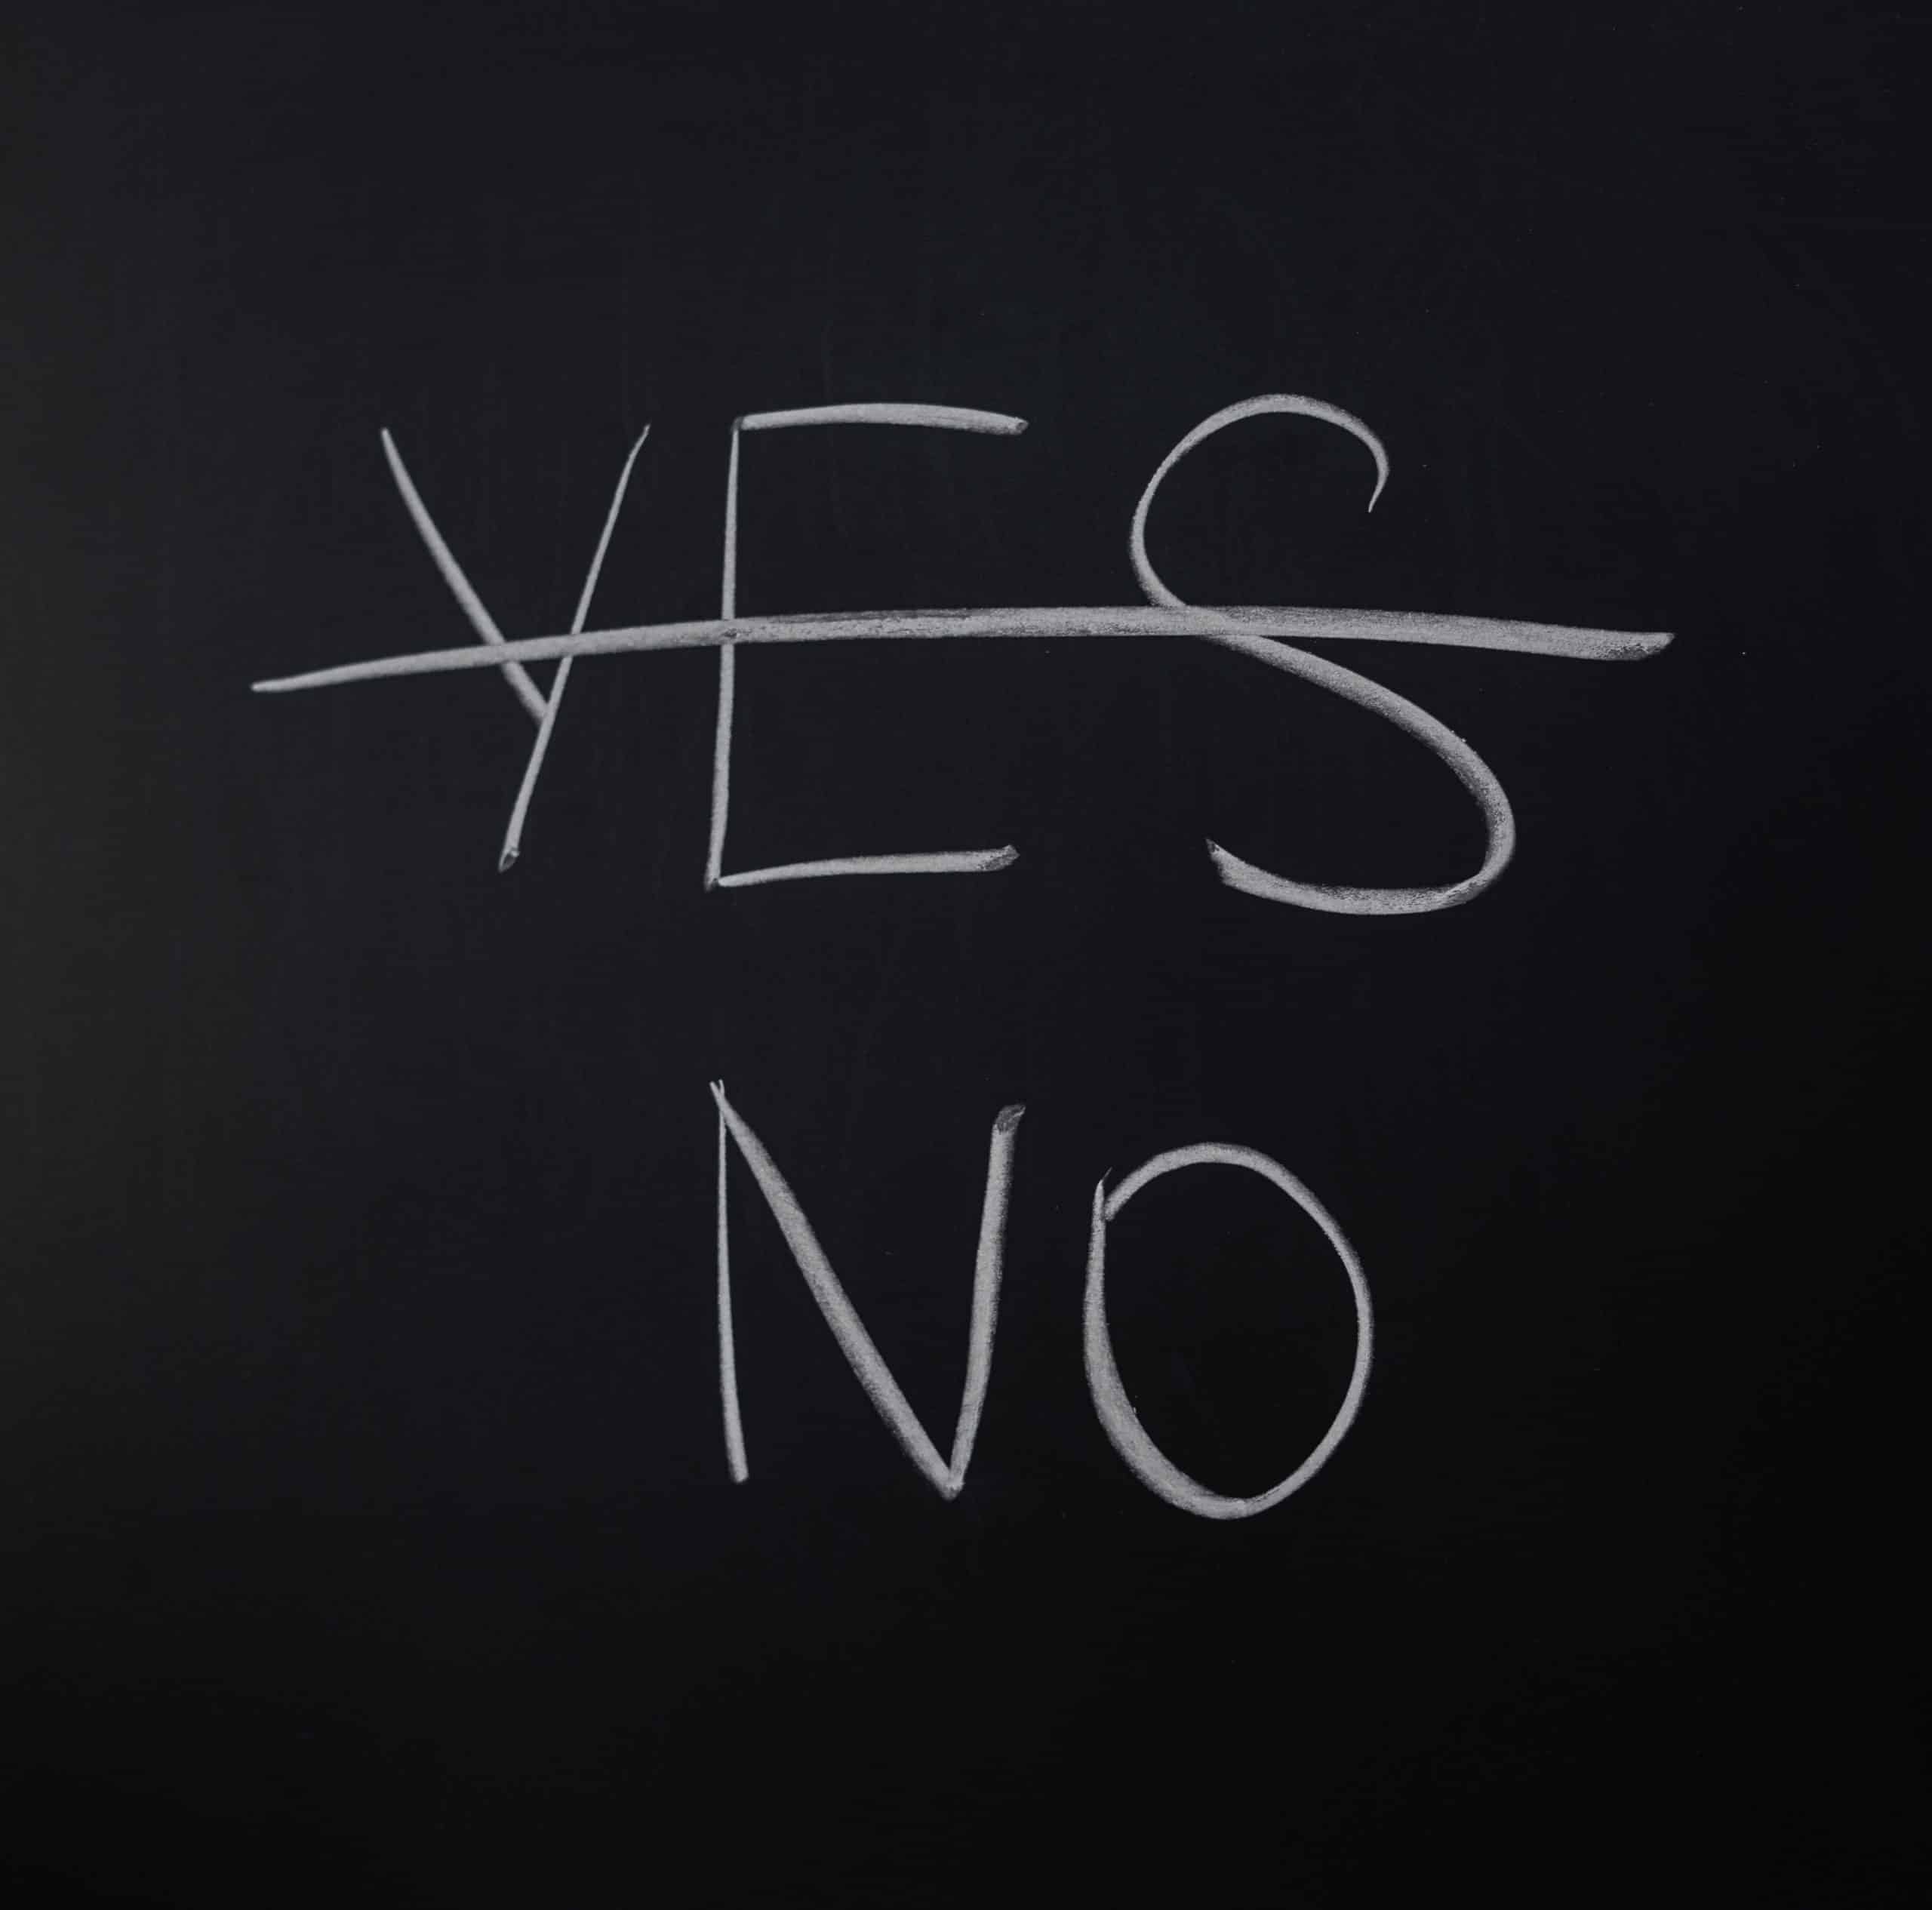 A blackboard. Written in white chalk is the word "Yes", with a line through it. Underneath it is the word "No"